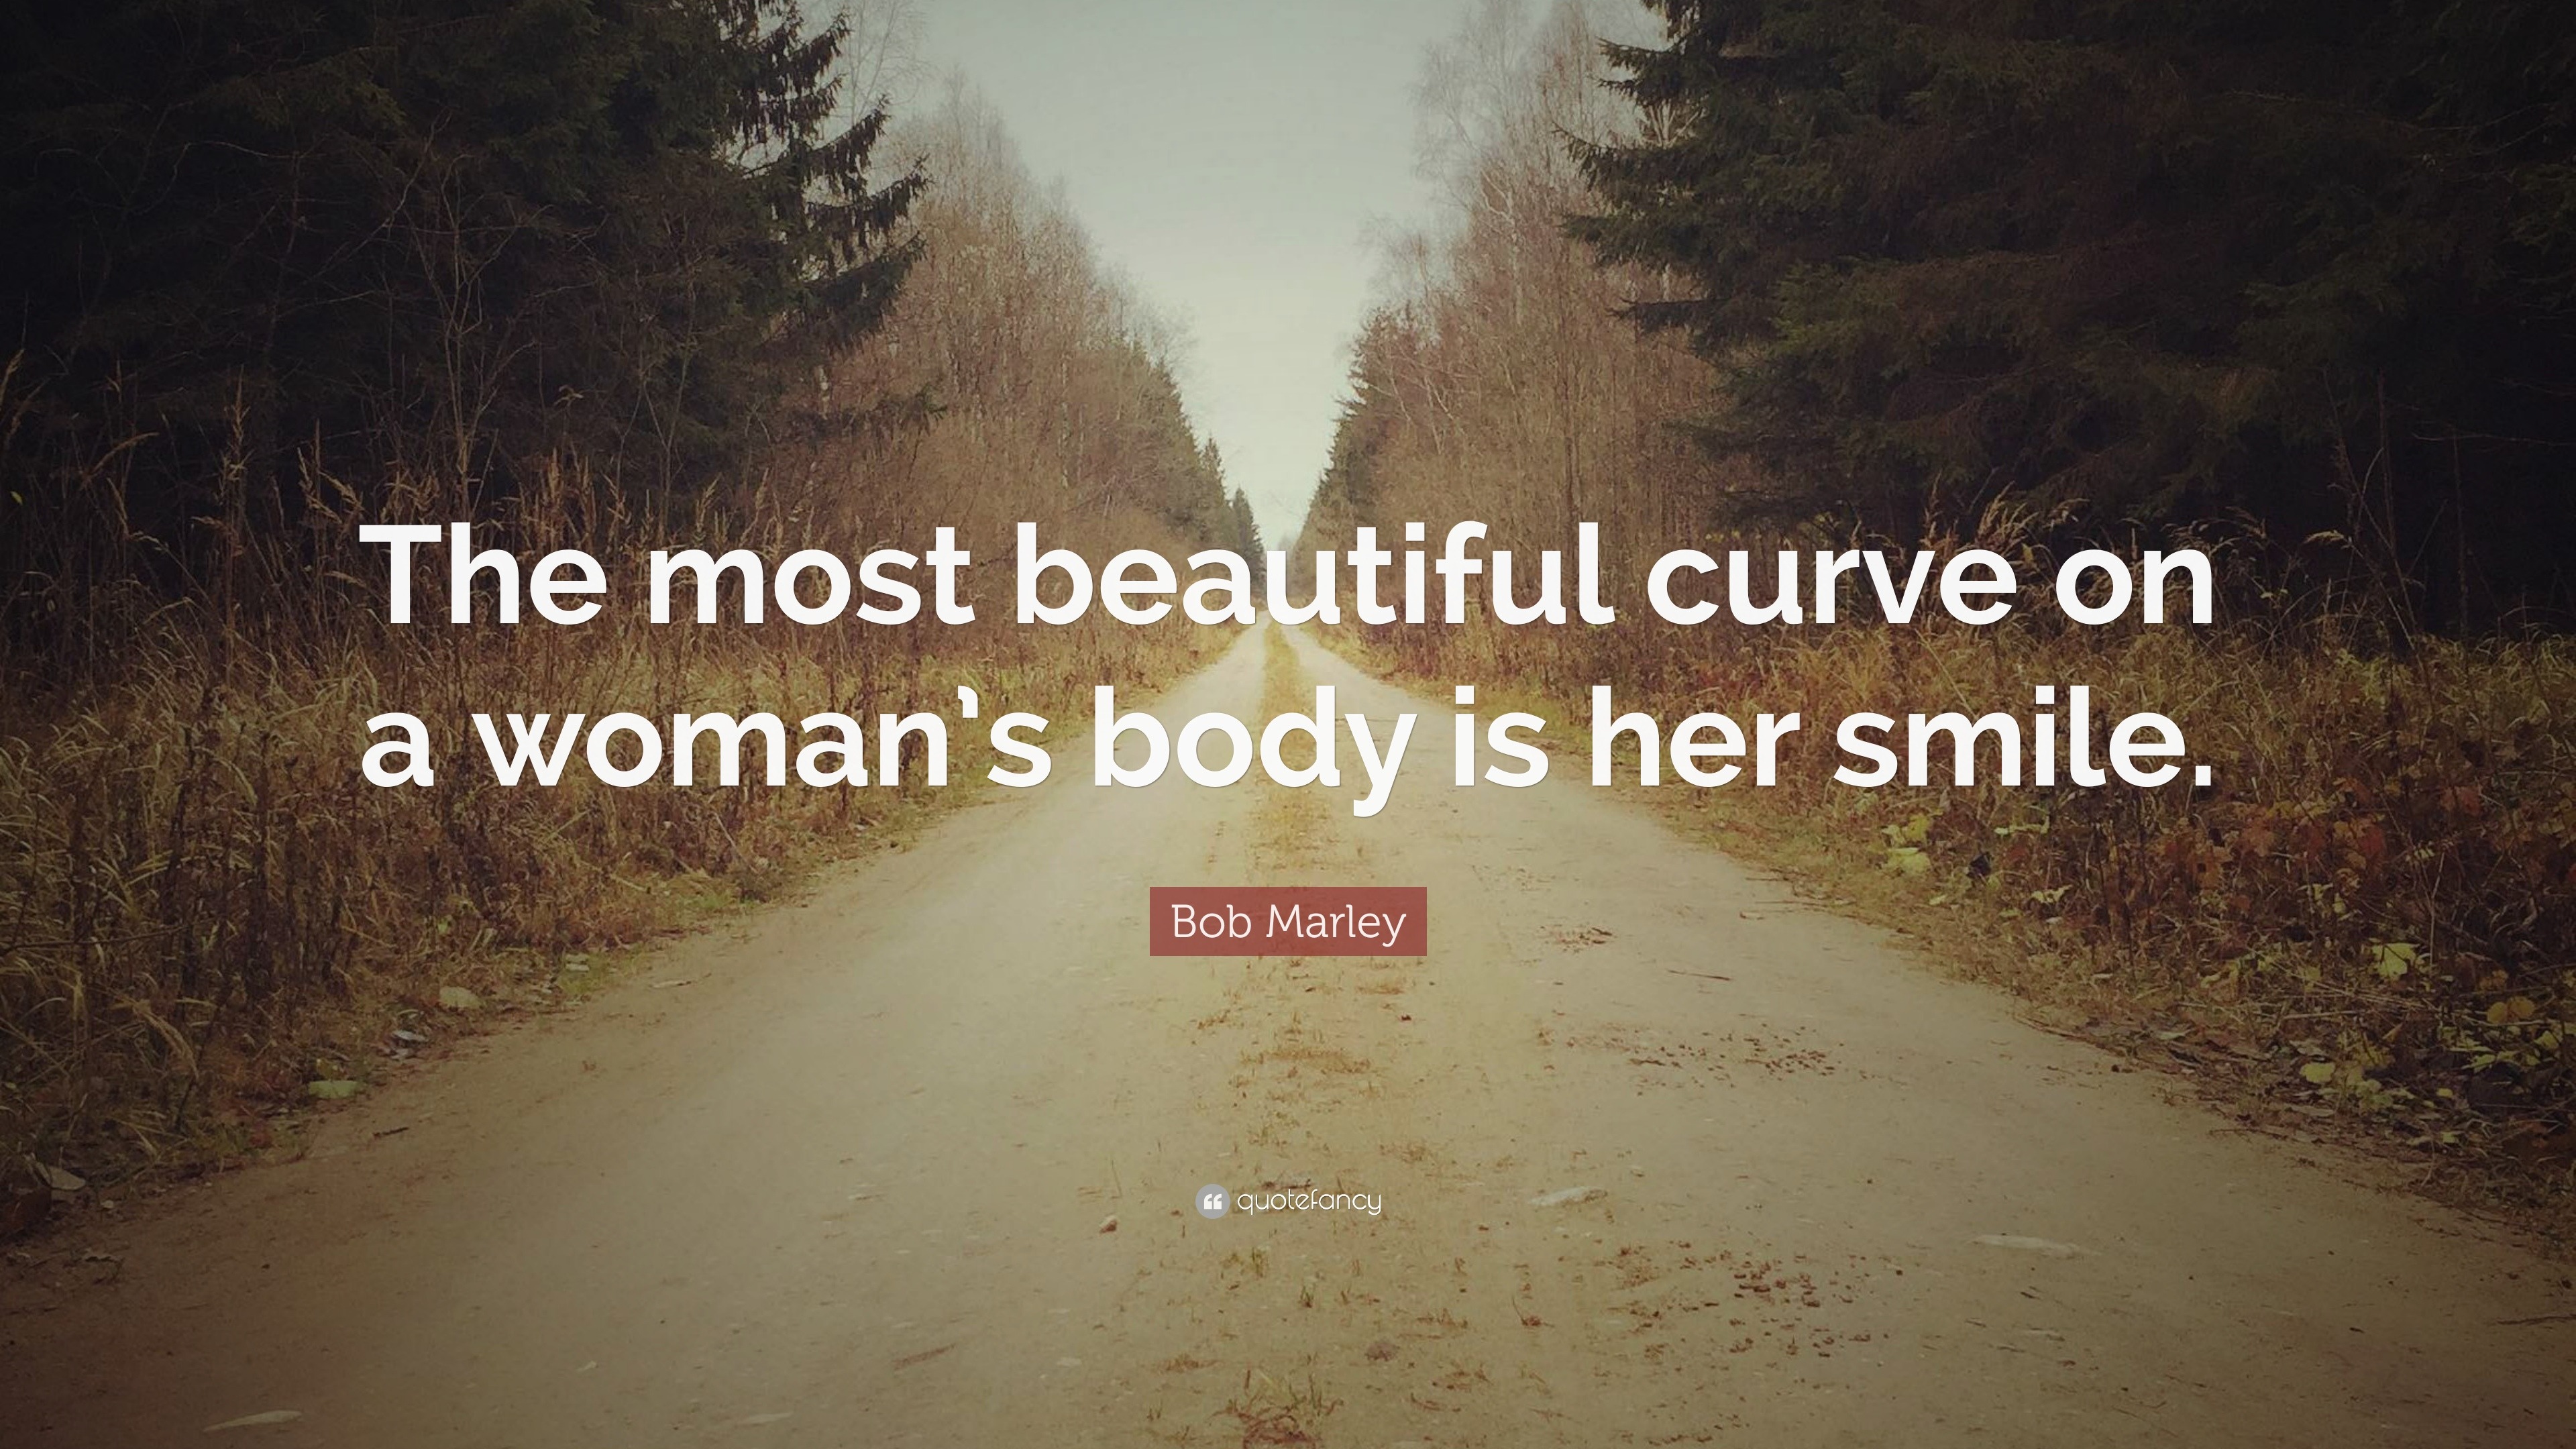 Bob Marley Quote: “The most beautiful curve on a woman's body is her smile.”